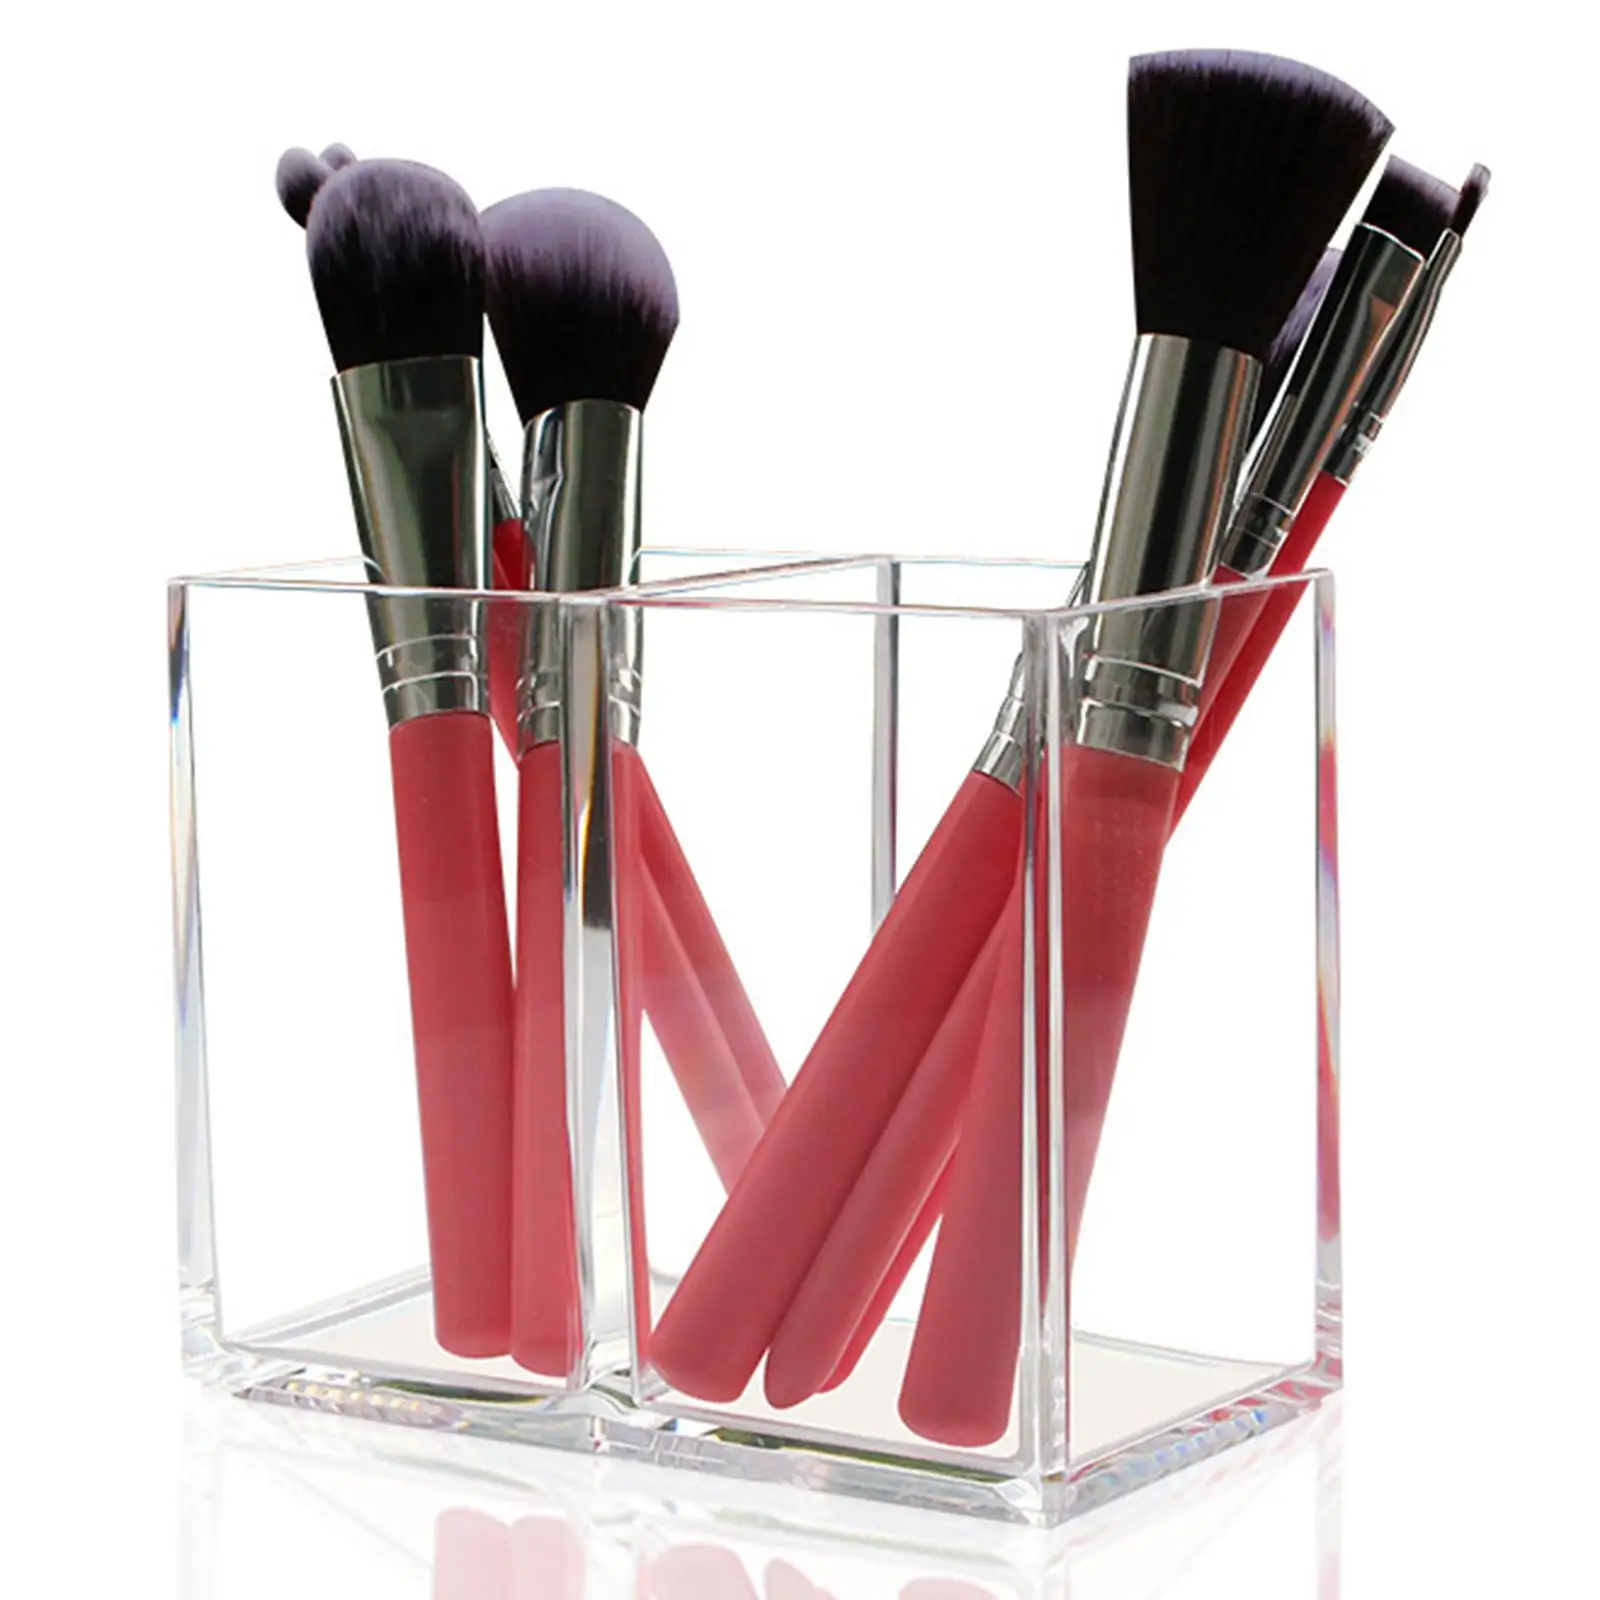 Clear Makeup Brush Holder 2 Grids Large Capacity Desktop Organizer Box Pen Pencil Cup Holder Display Holder Cosmetic Container